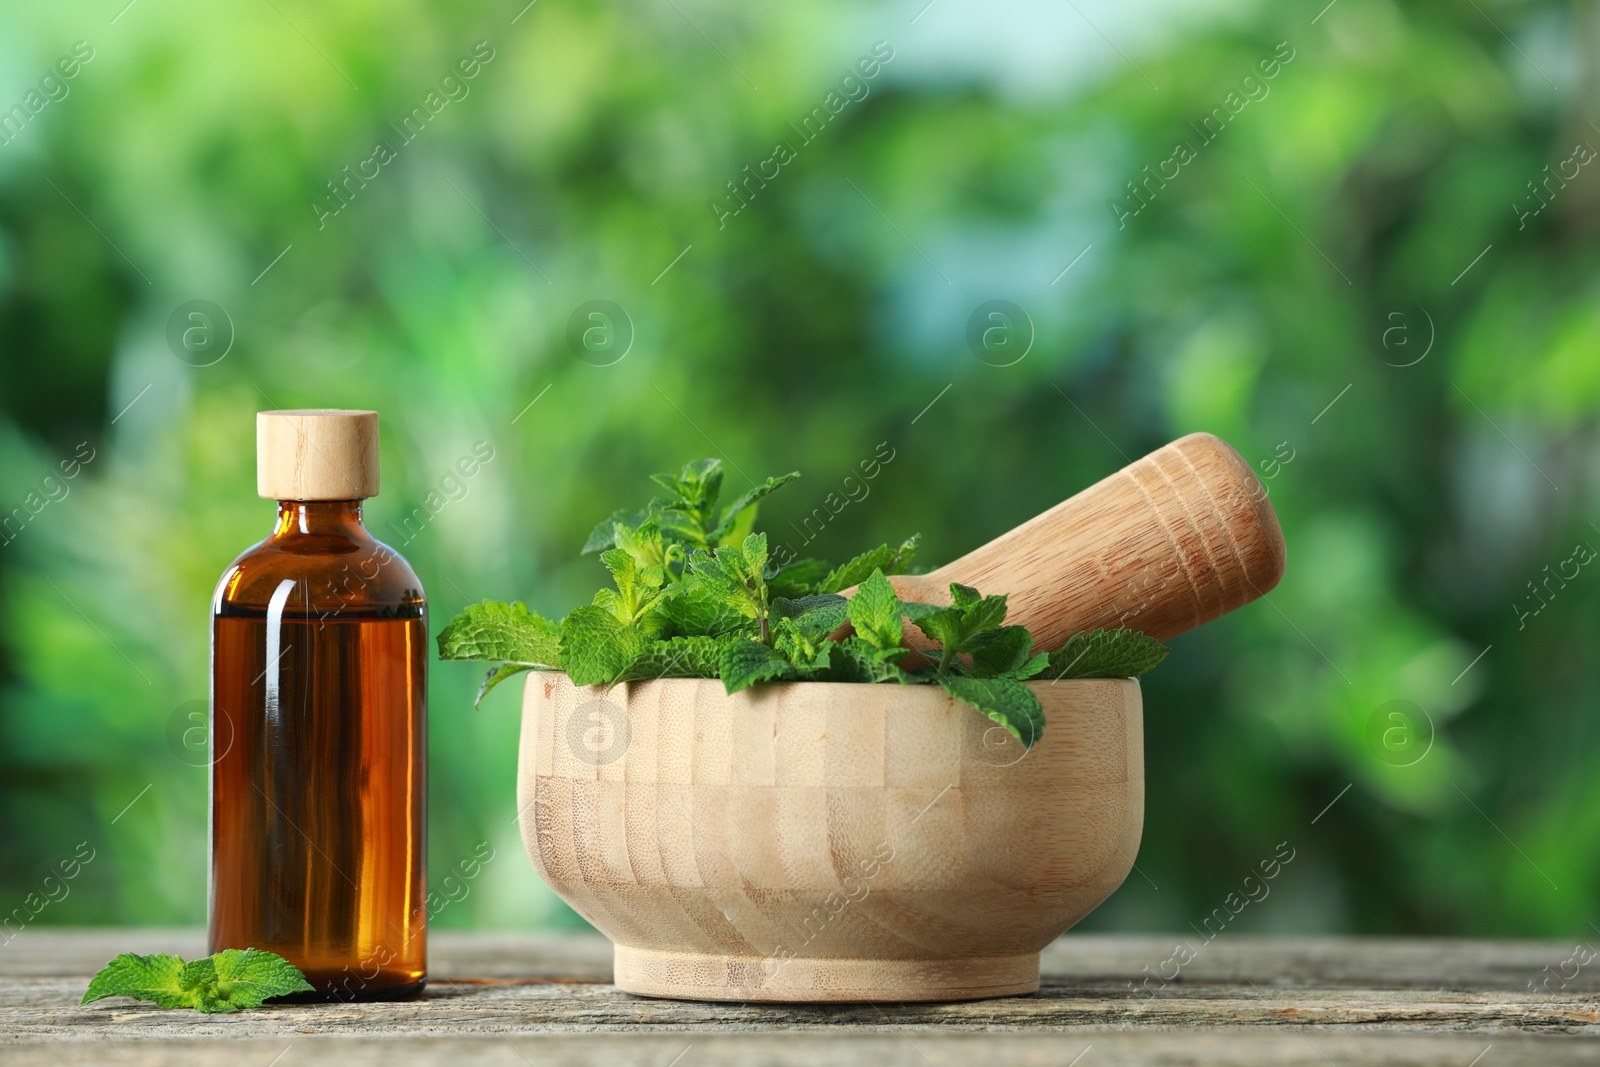 Photo of Bottle of mint essential oil and leaves on wooden table against blurred background